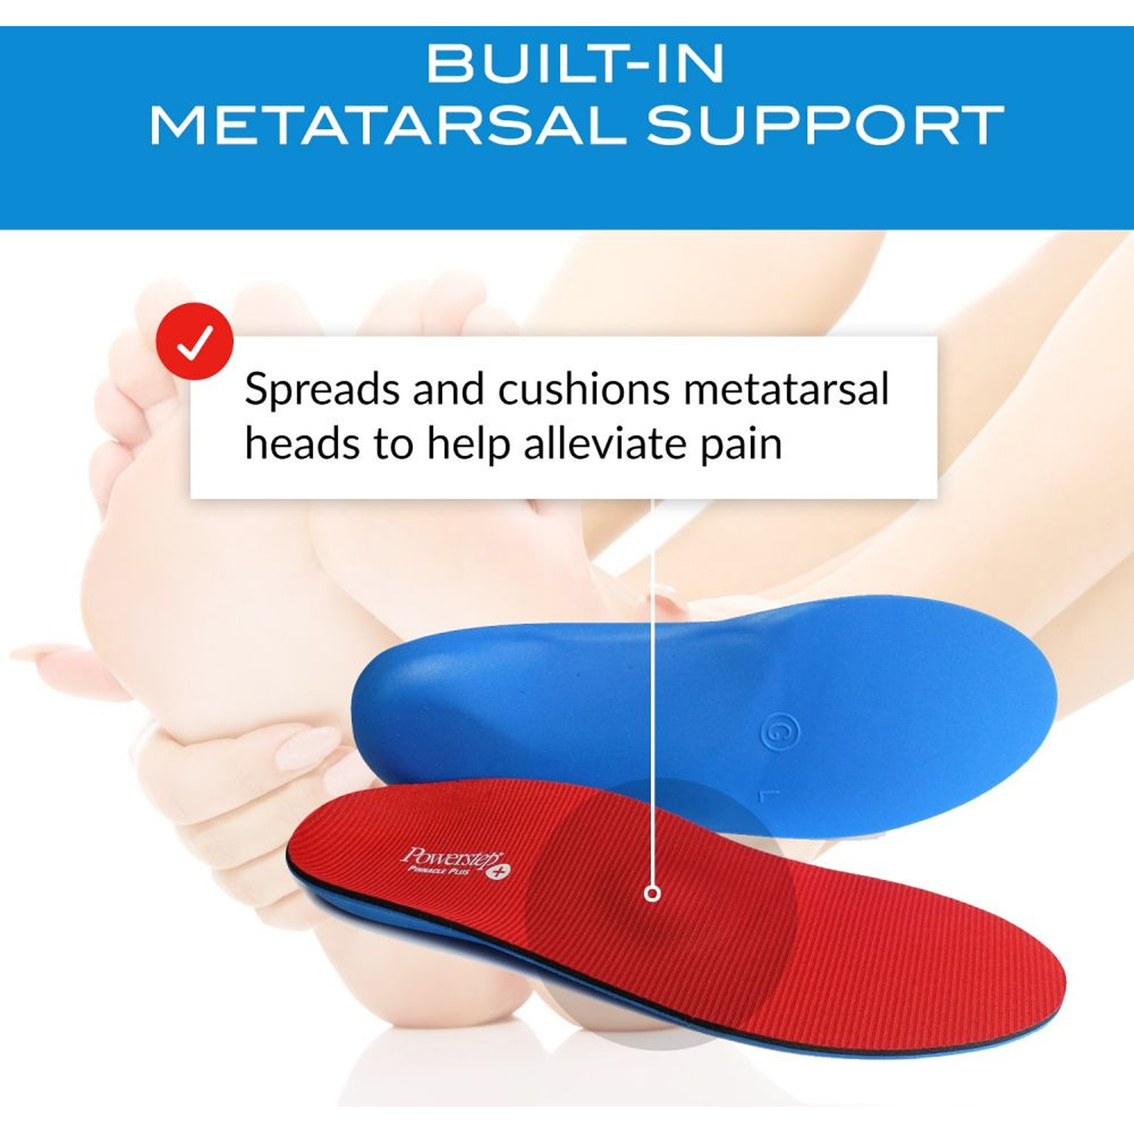 Powerstep Pinnacle Plus Full Length Orthotic Insoles with Metatarsal Support - Image 6 of 10